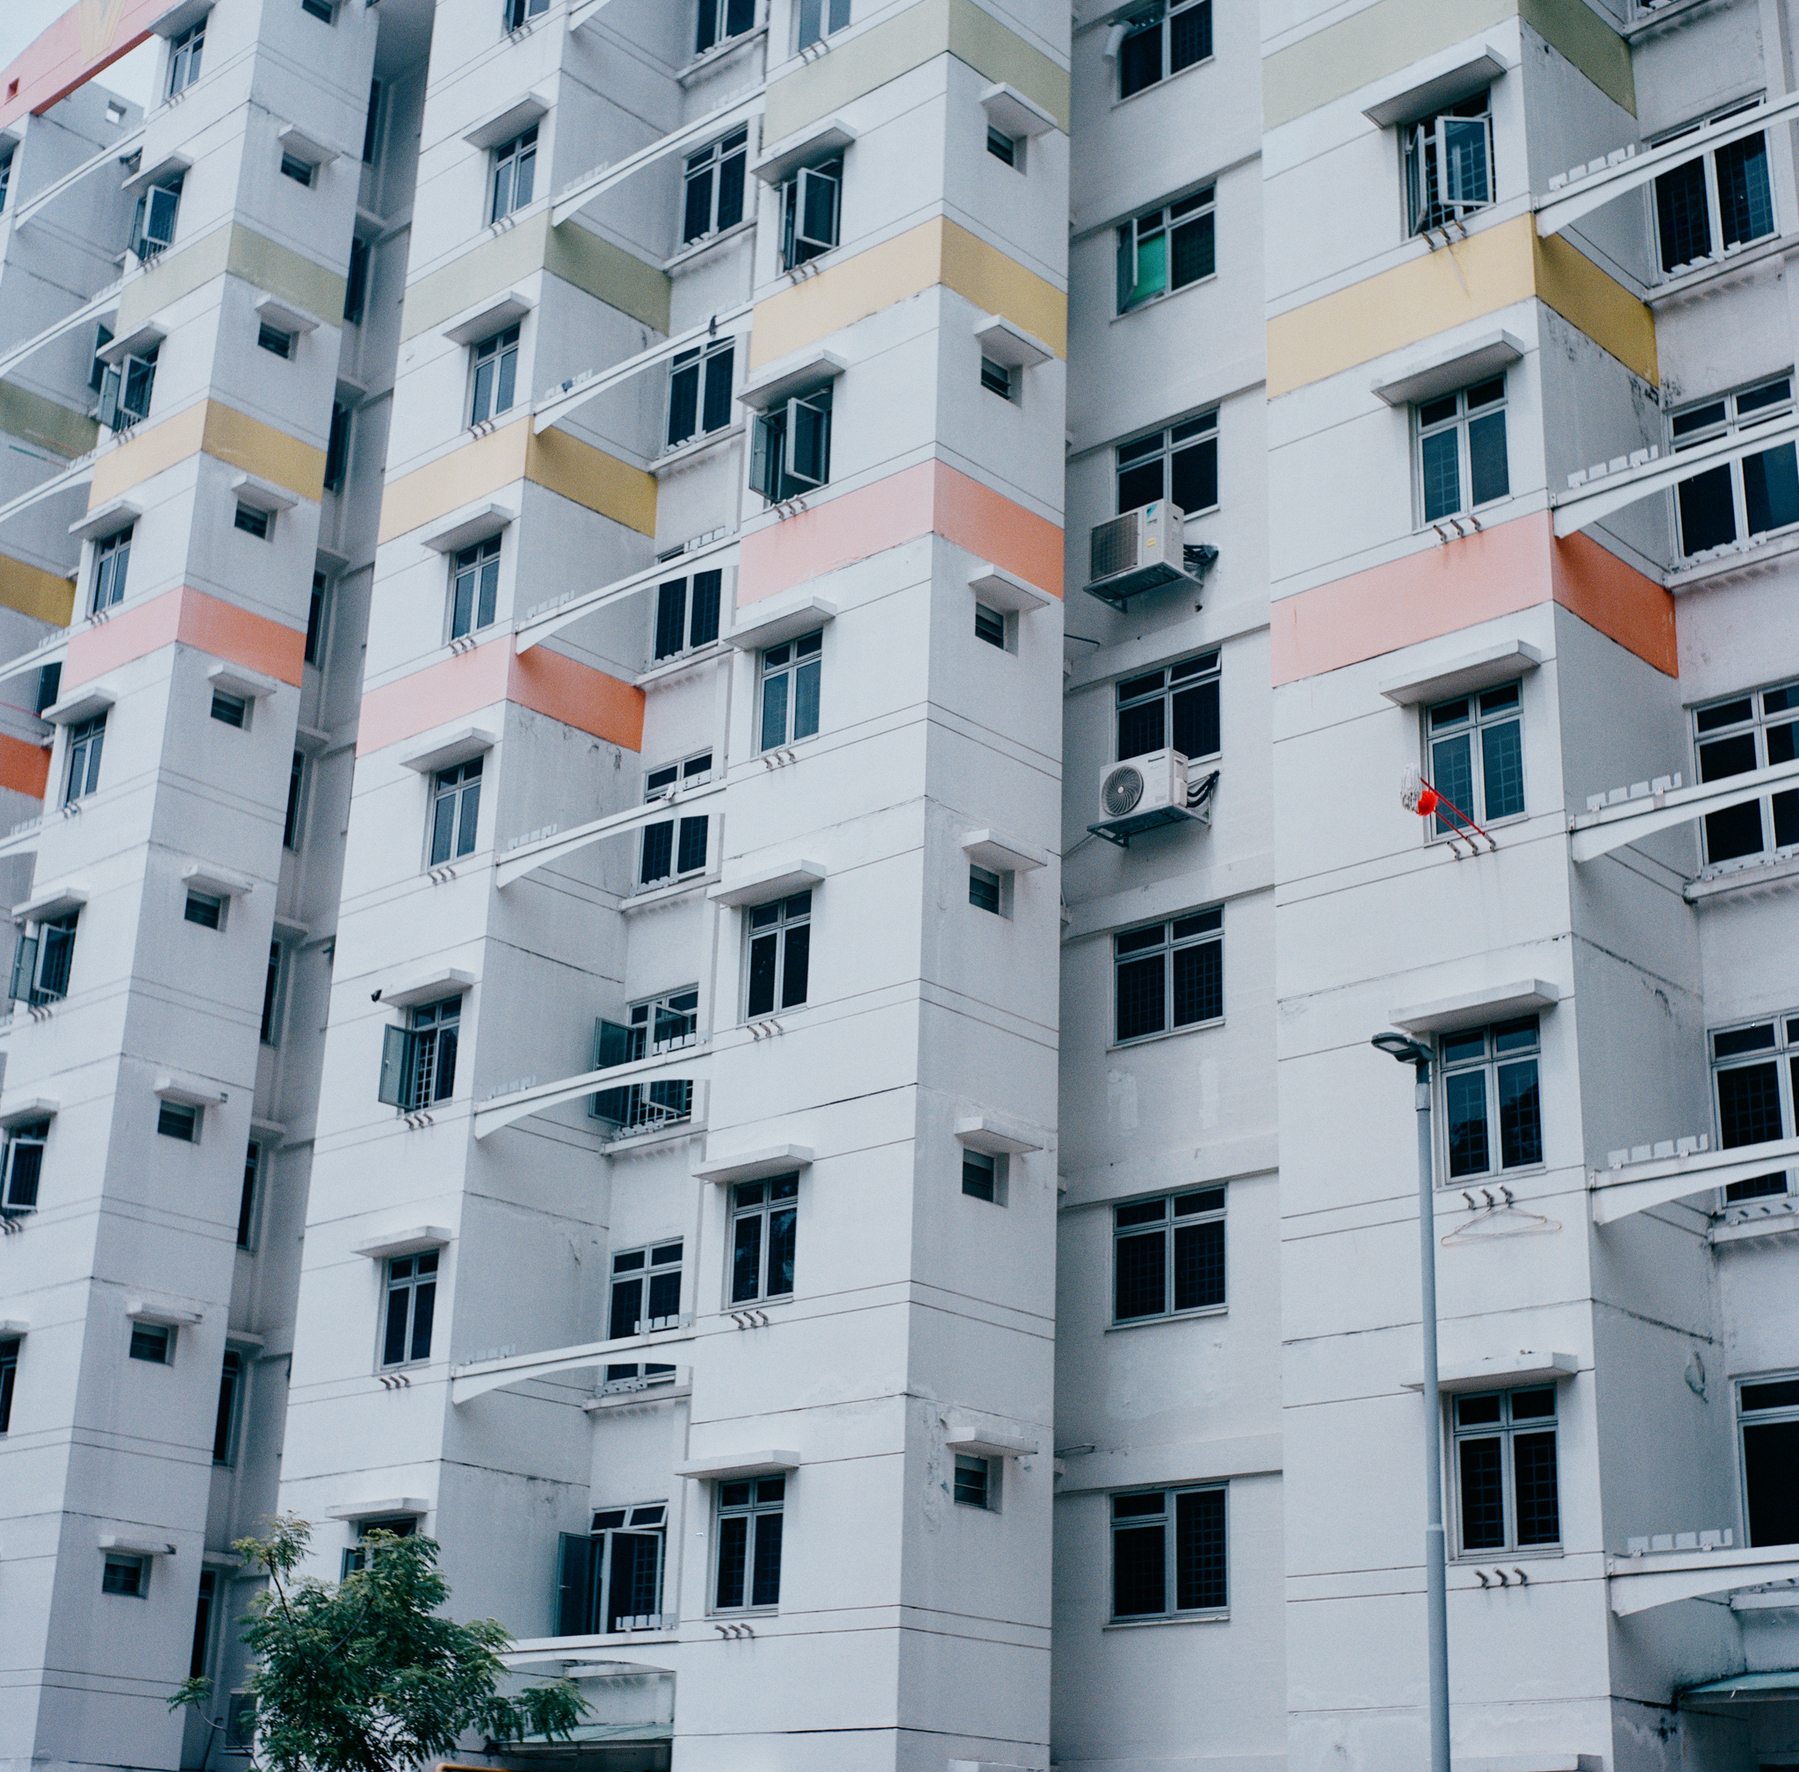 2. A scan of a color photo of a public housing estate with uniform windows in singapore